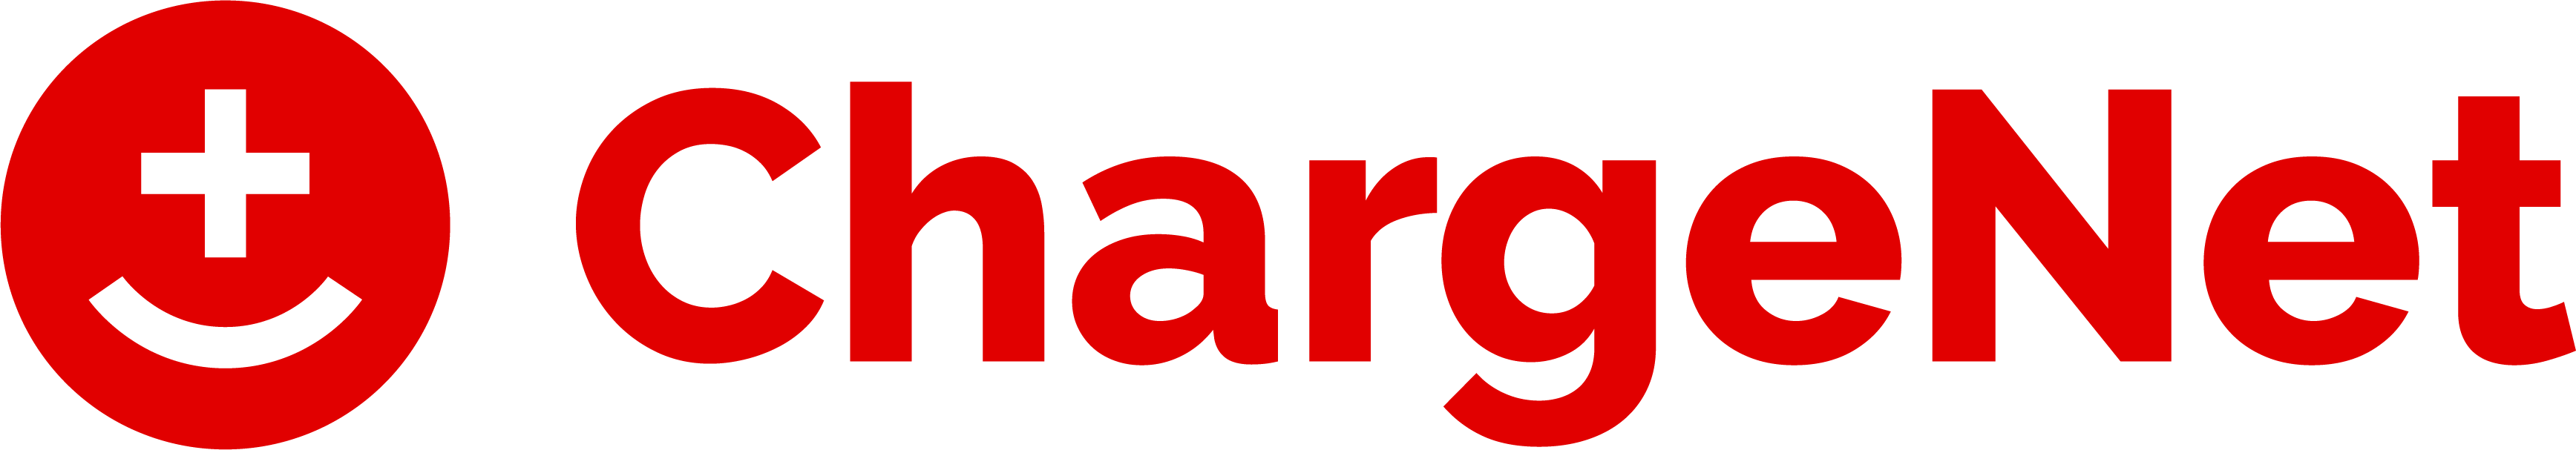 ChargeNet Logo.png